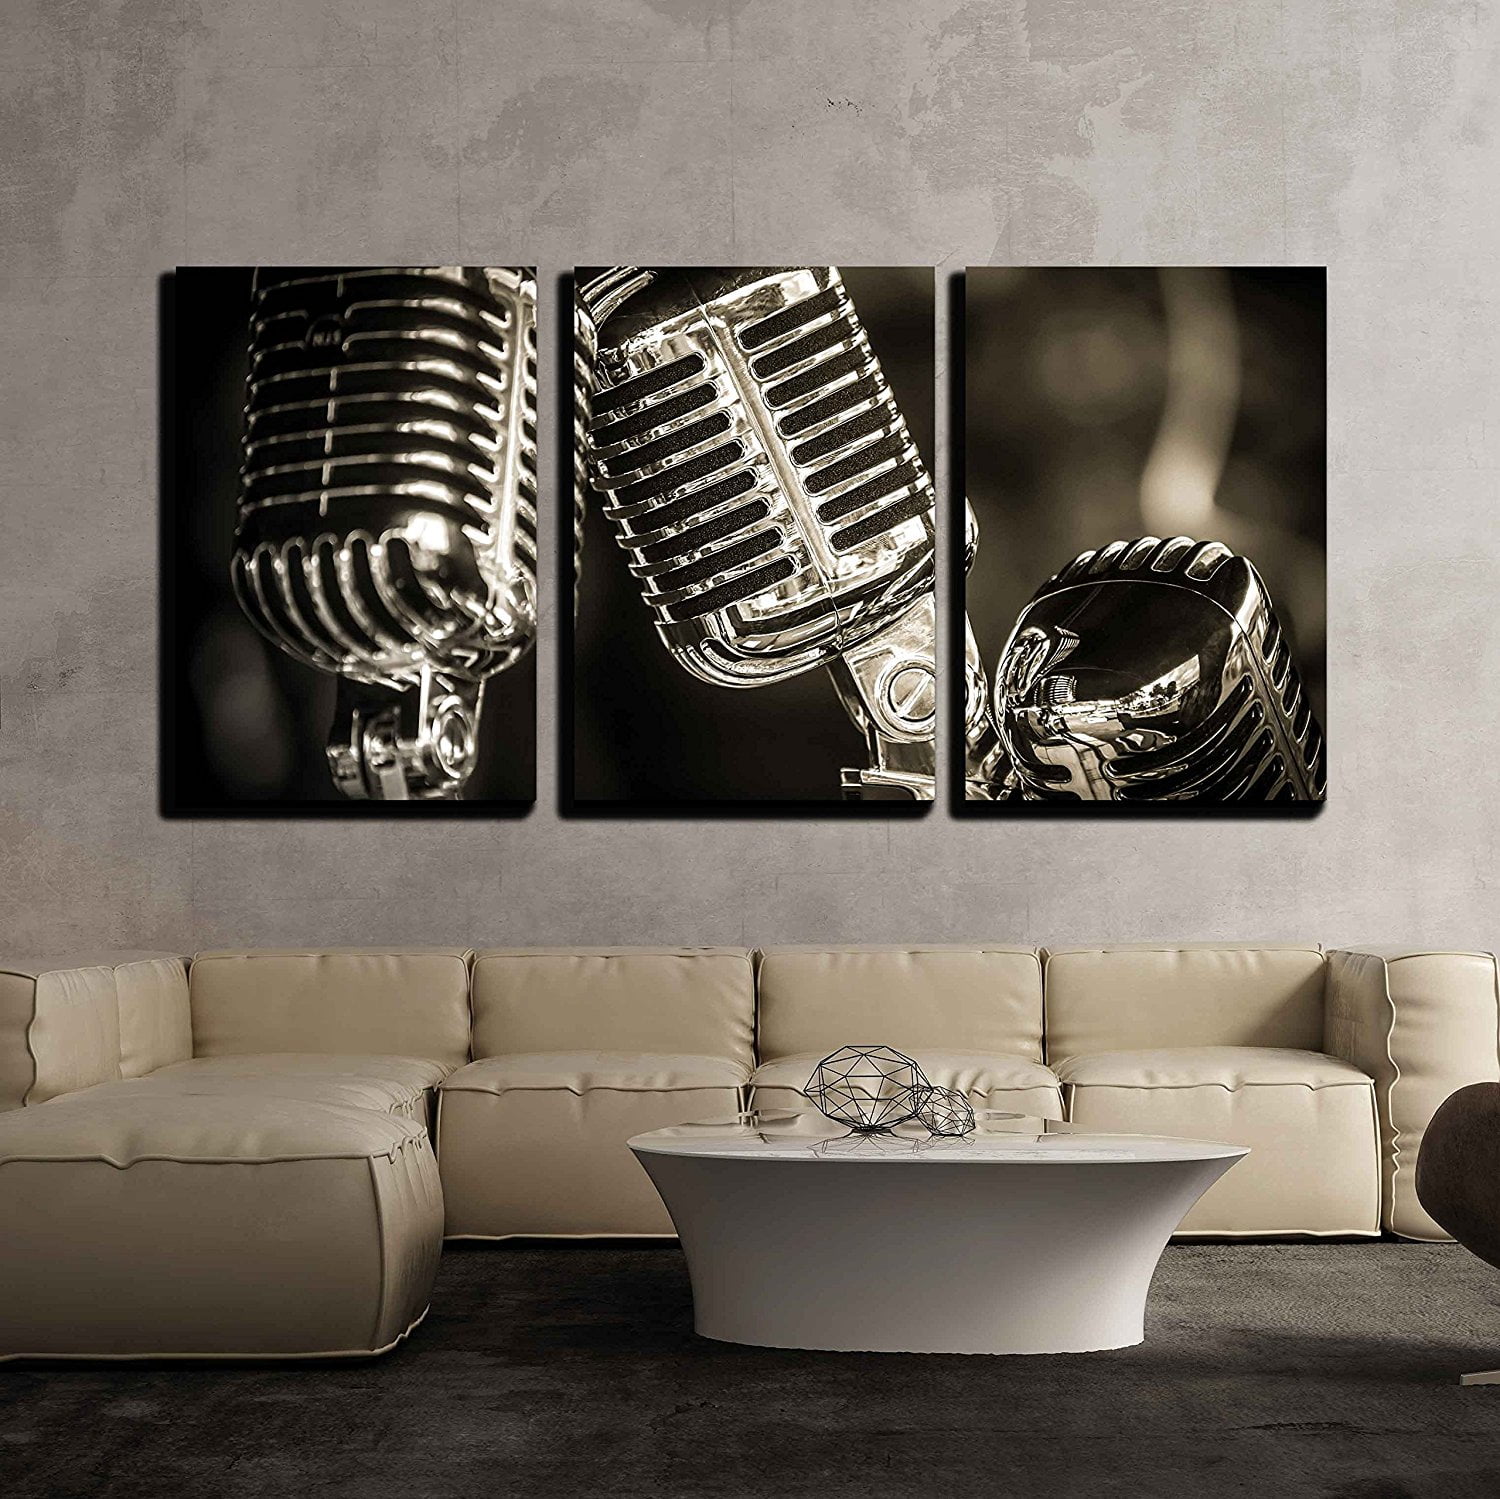 Dj Microphone Music 5 piece canvas Wall Art Home Decor Picture Print 